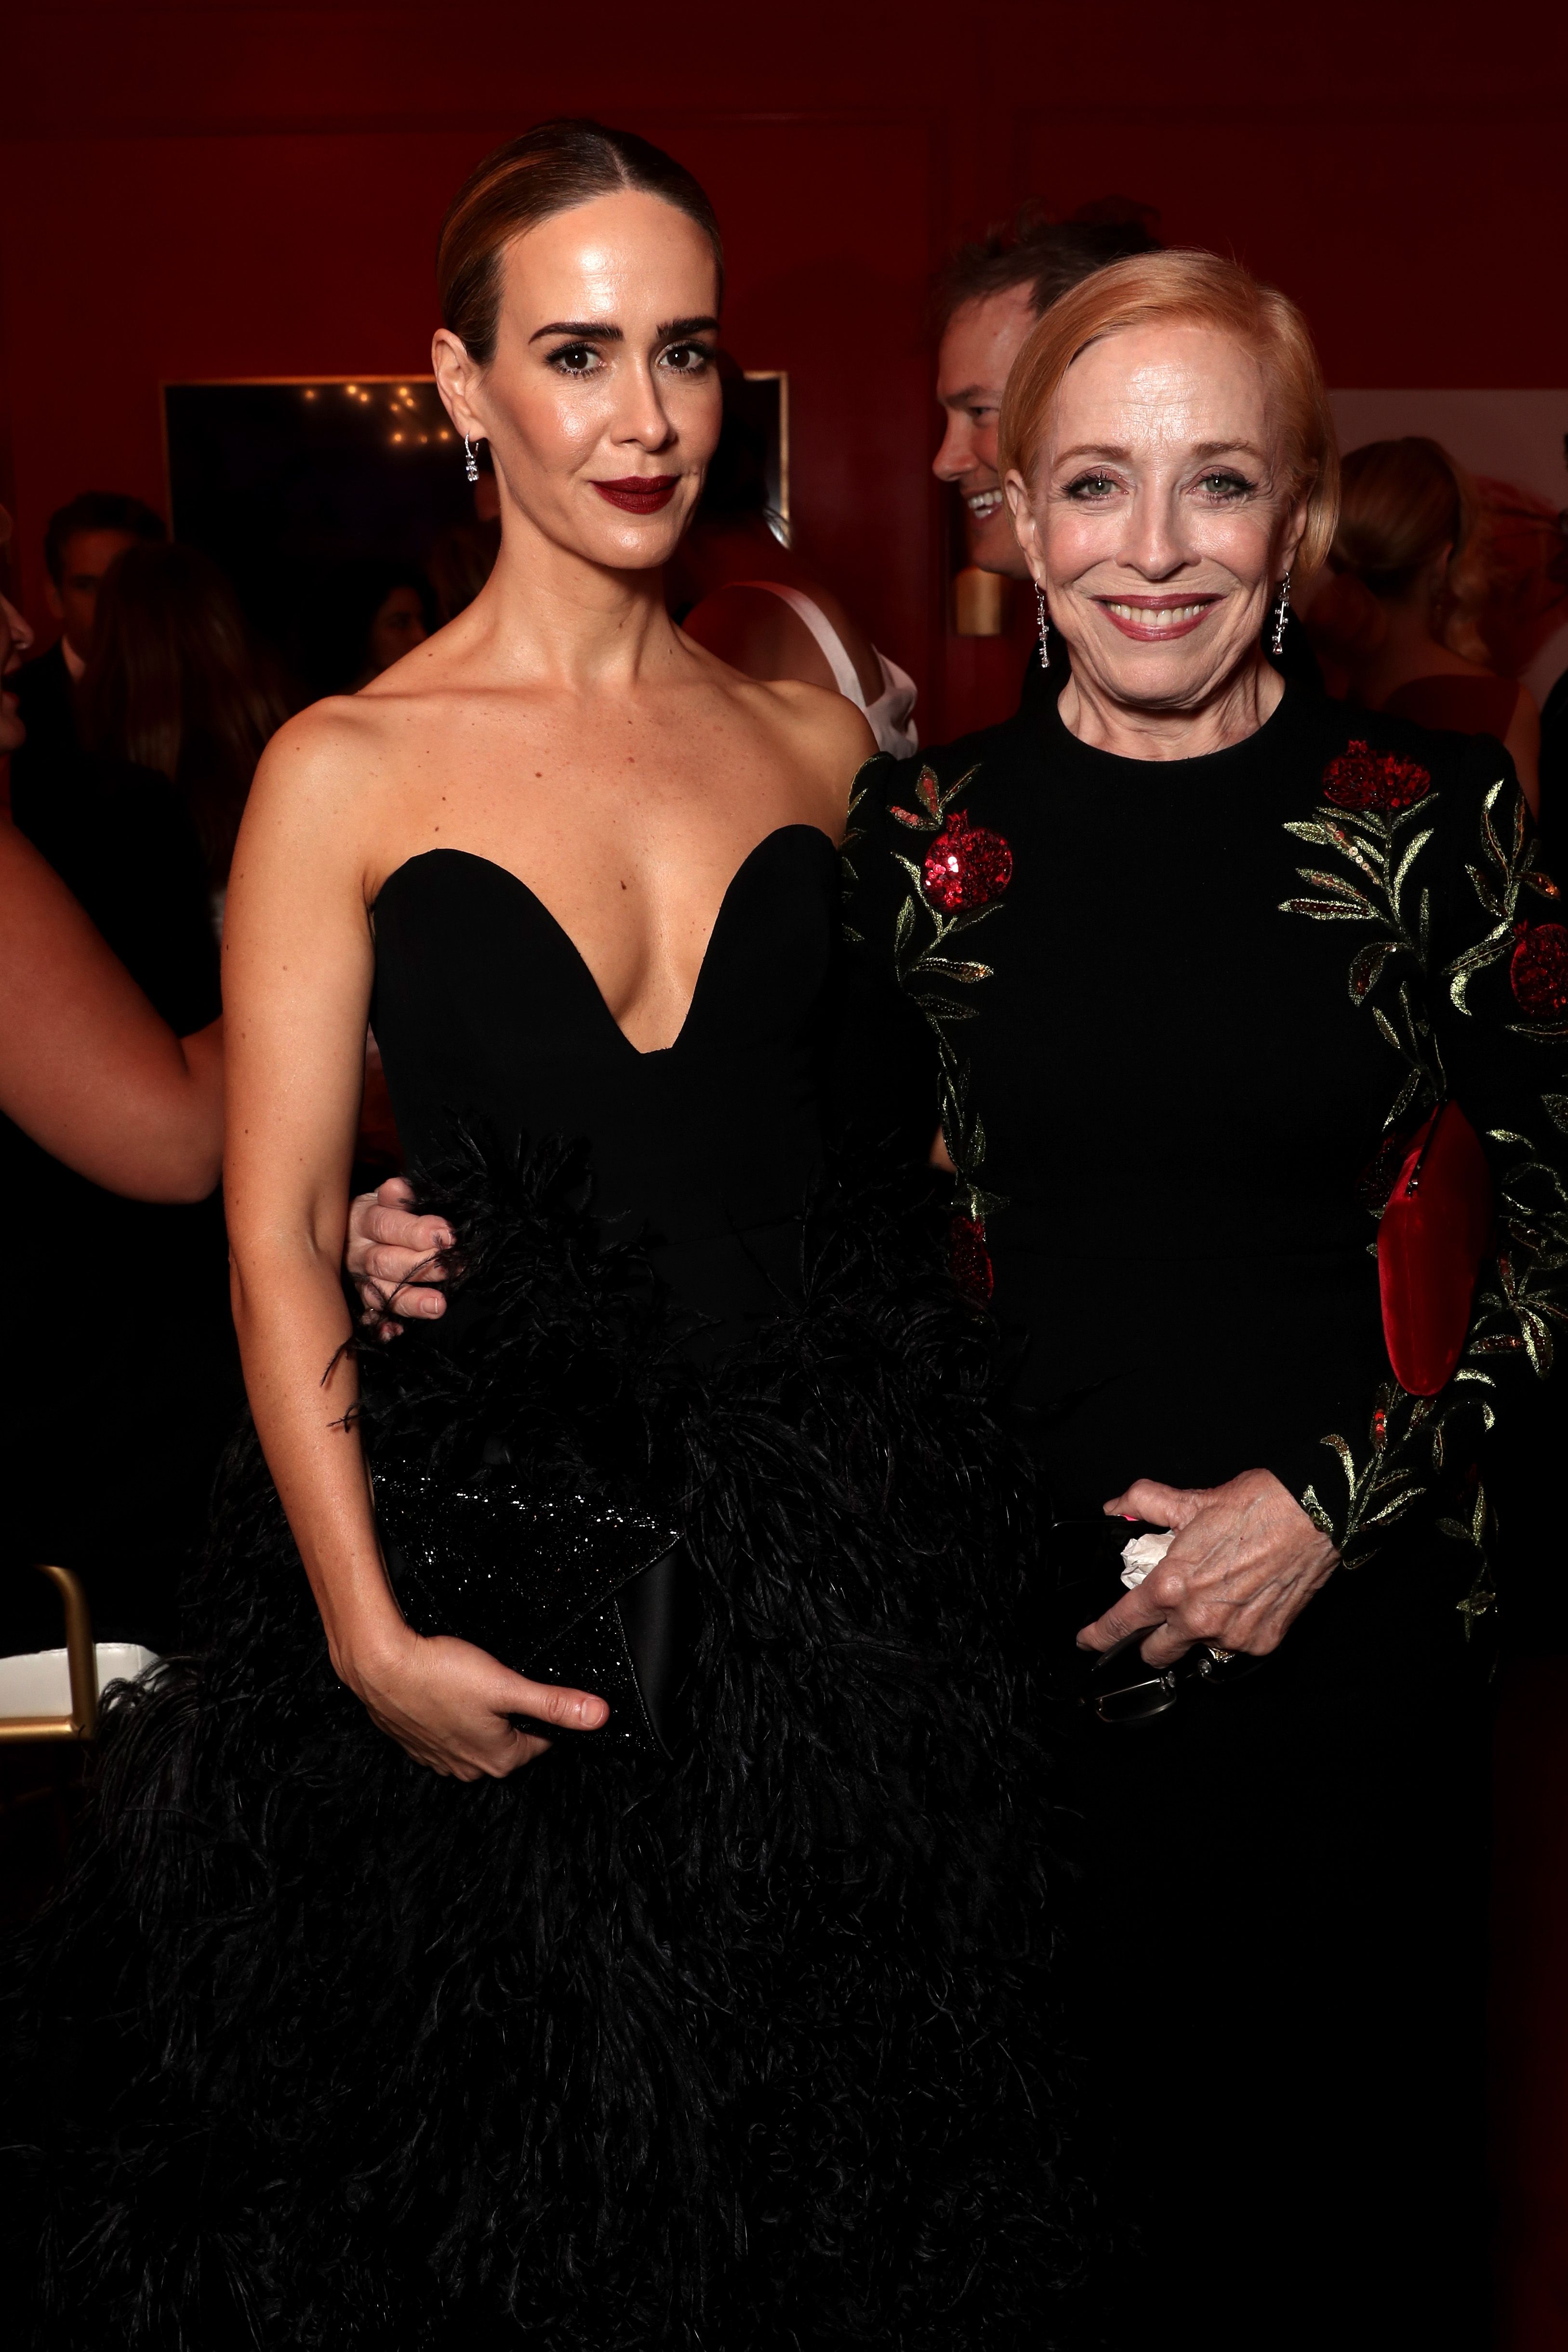 Sarah paulson holland taylor age difference